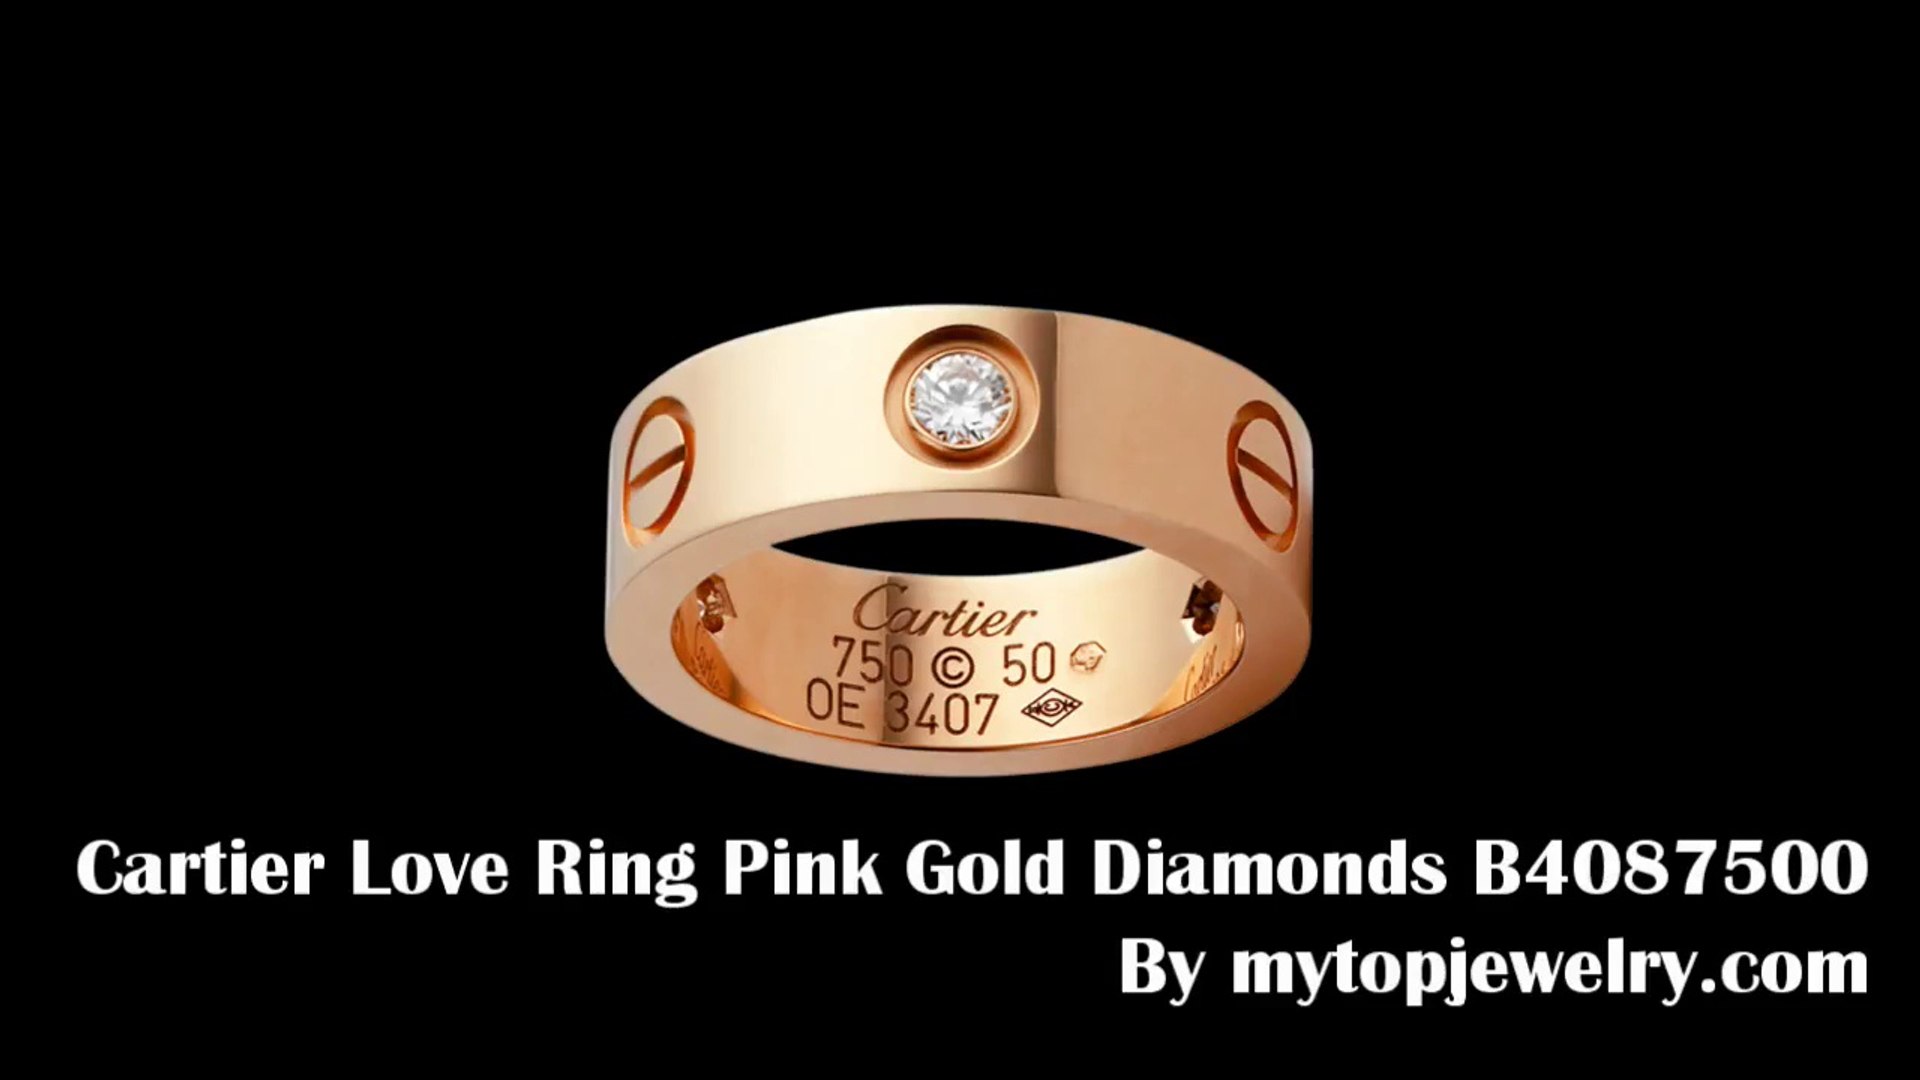 Cartier Love Ring - Cartier Love Ring Pink Gold Diamonds B4087500 - video  Dailymotion